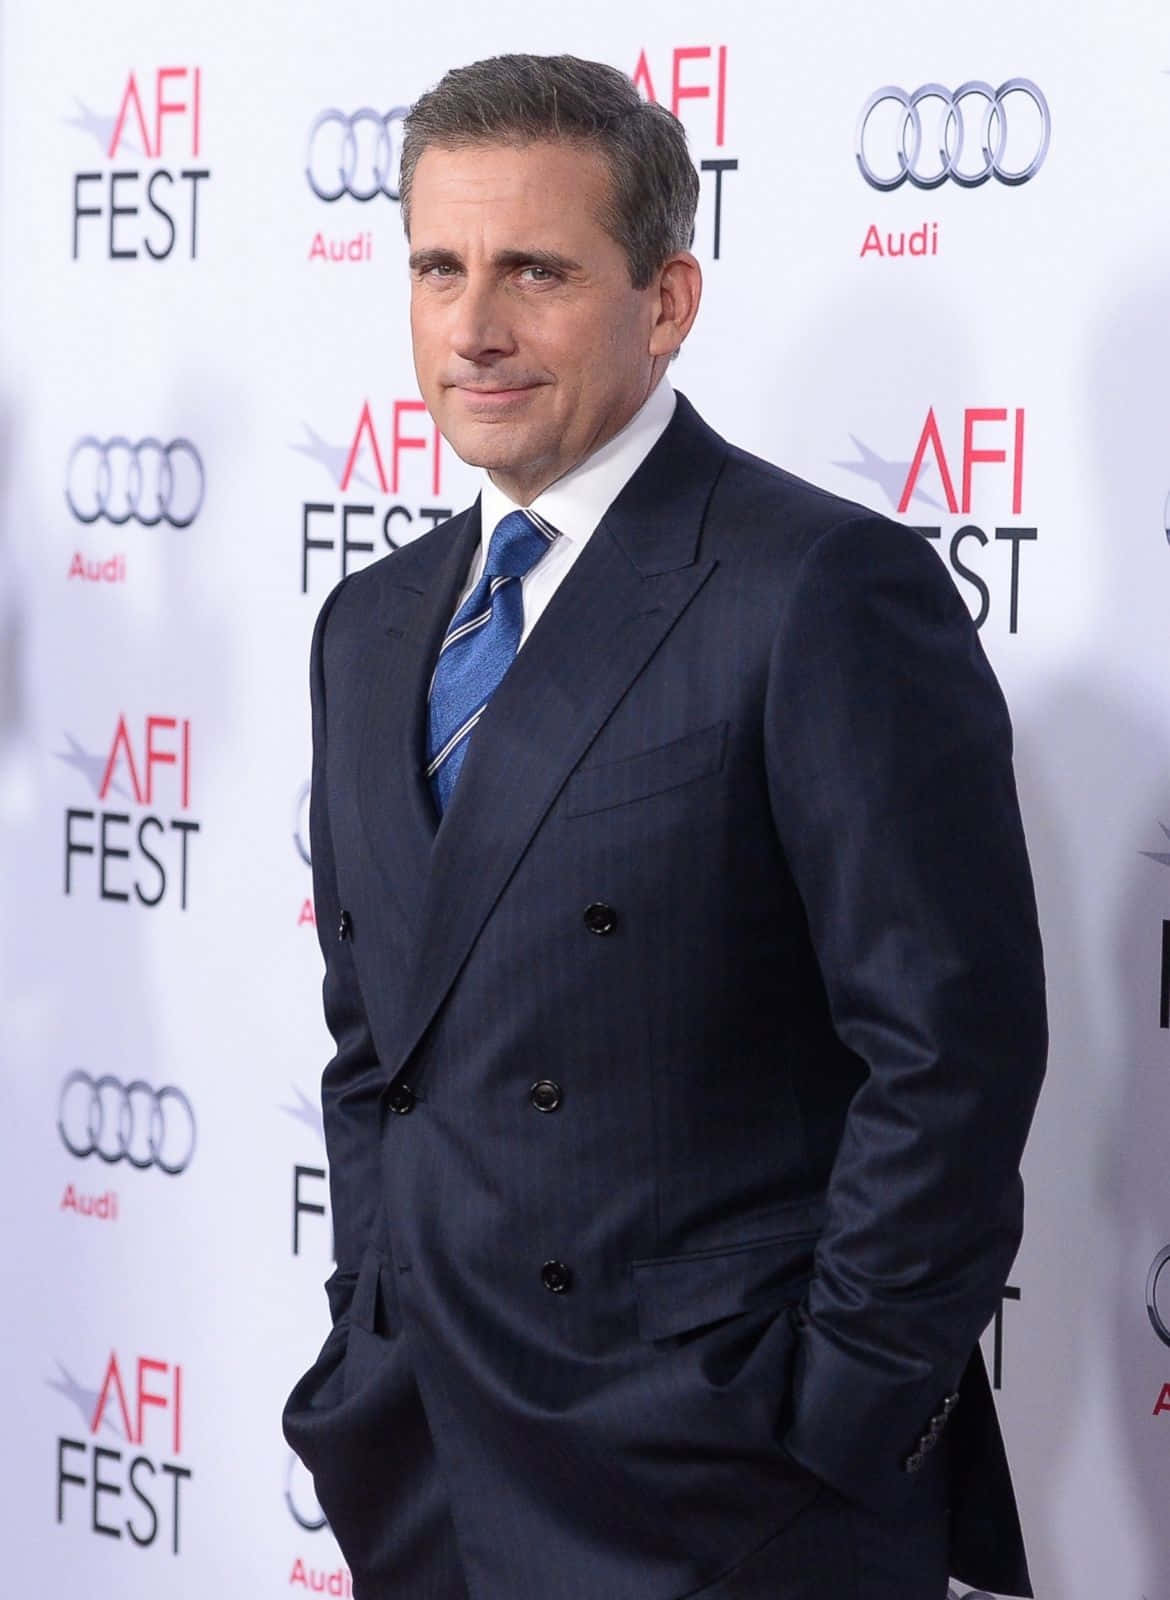 Actor Steve Carell Performing With The Improv Comedy Troupe 